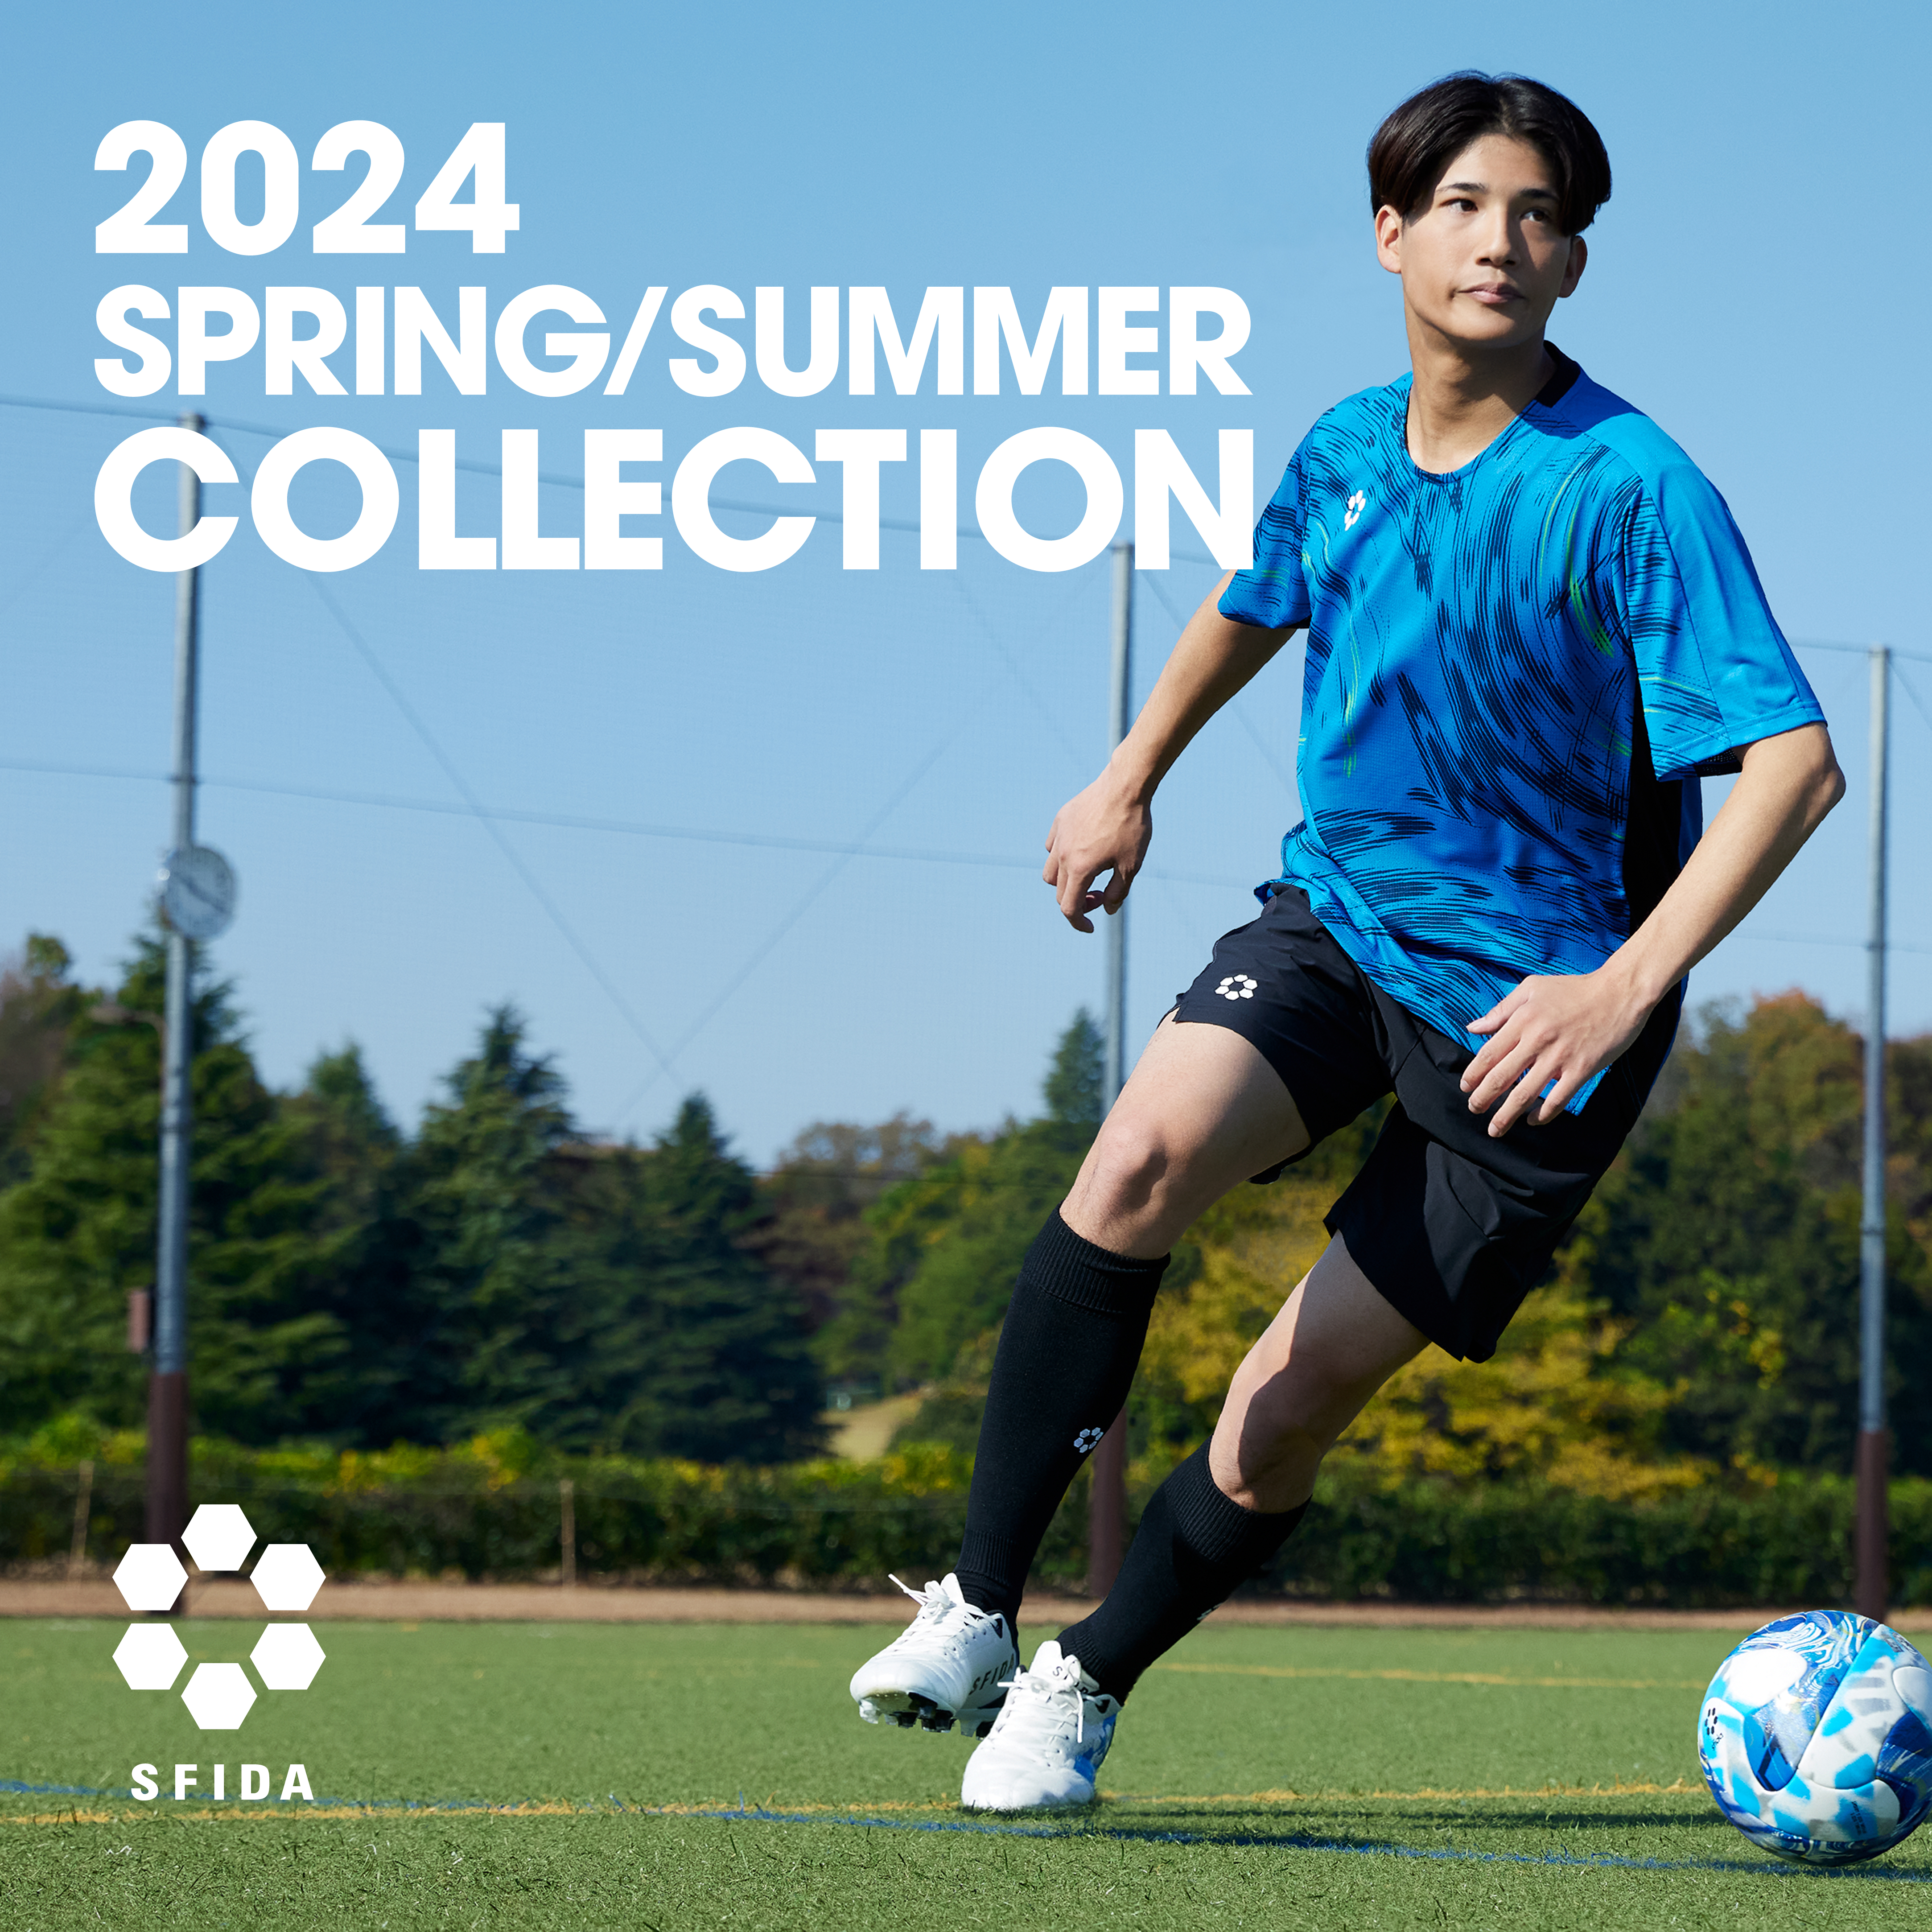 2024 SPRING/SUMMER COLLECTION